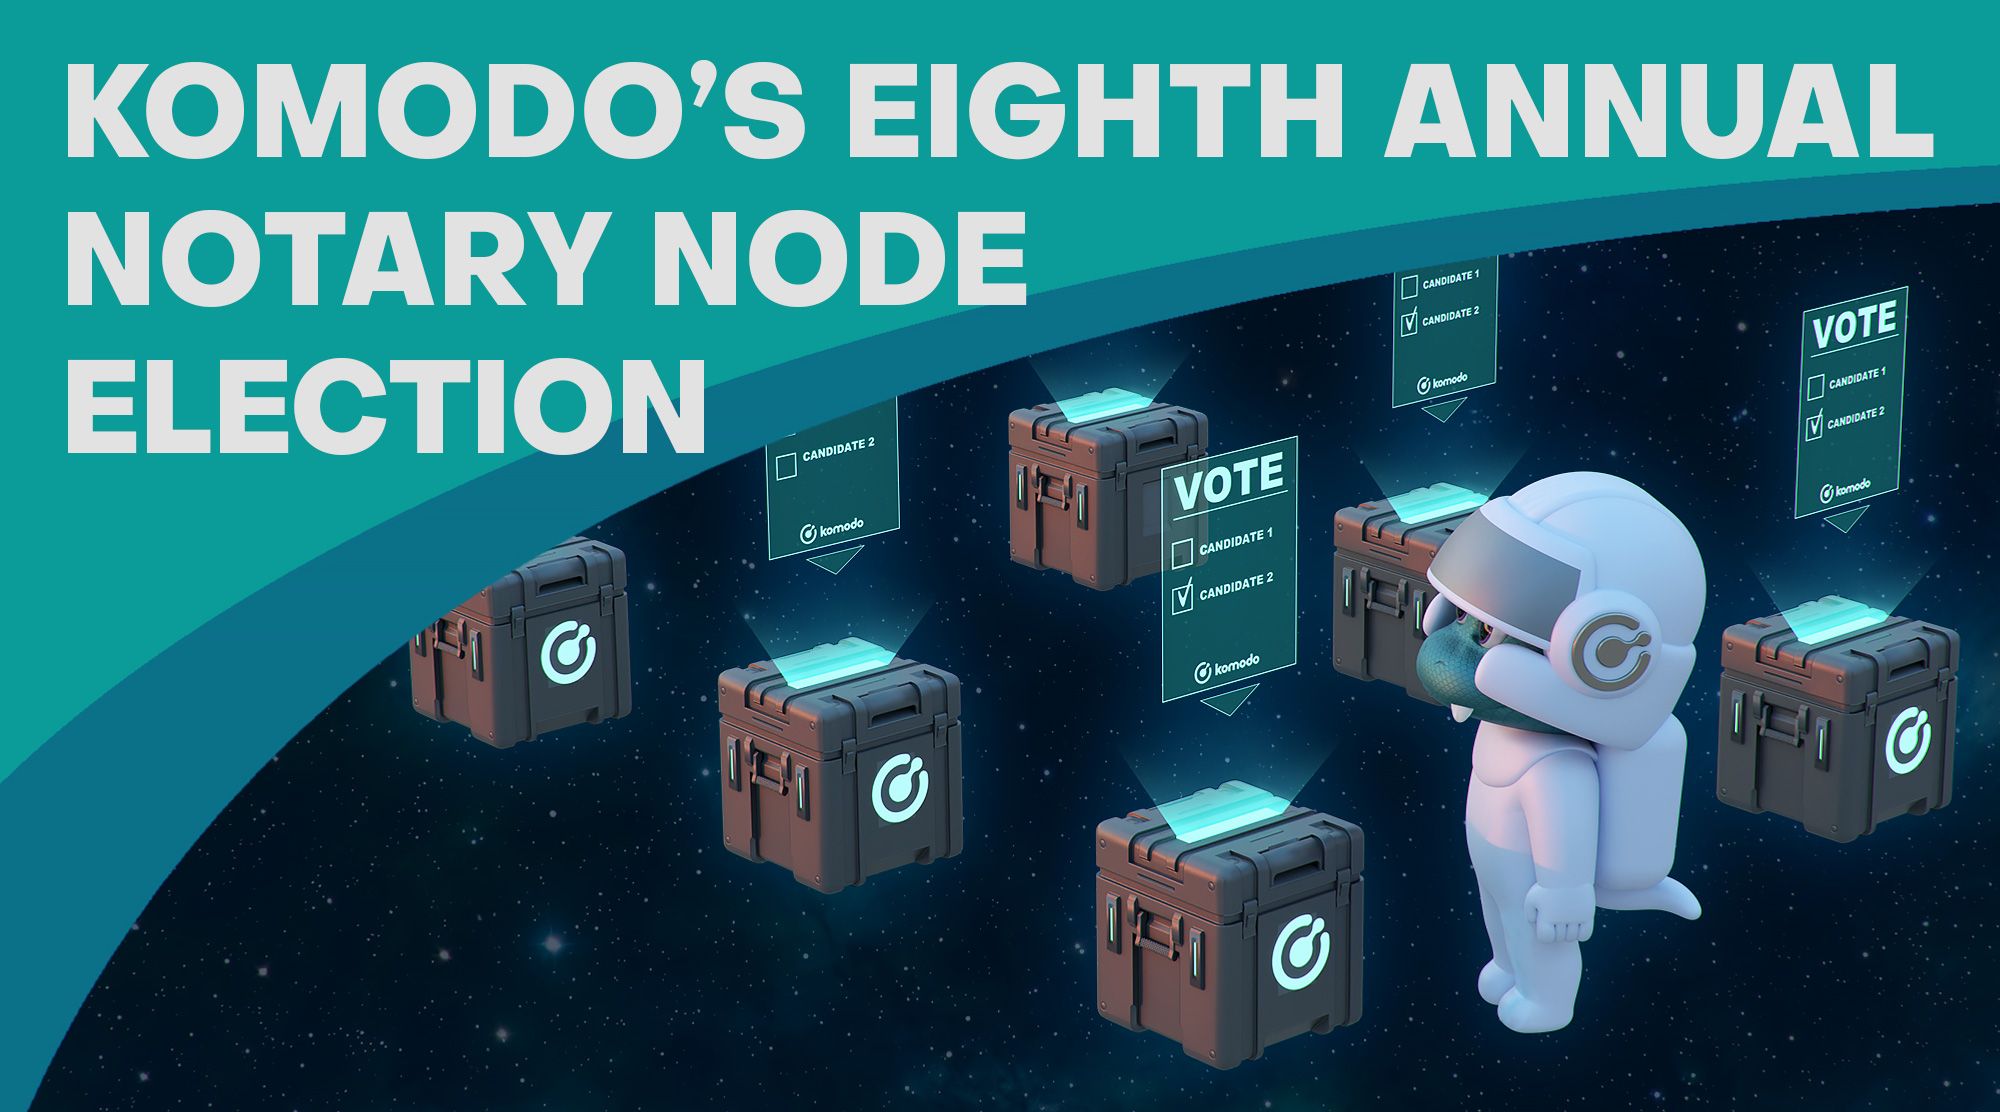 Official Results: Komodo’s Eighth Annual Notary Node Election